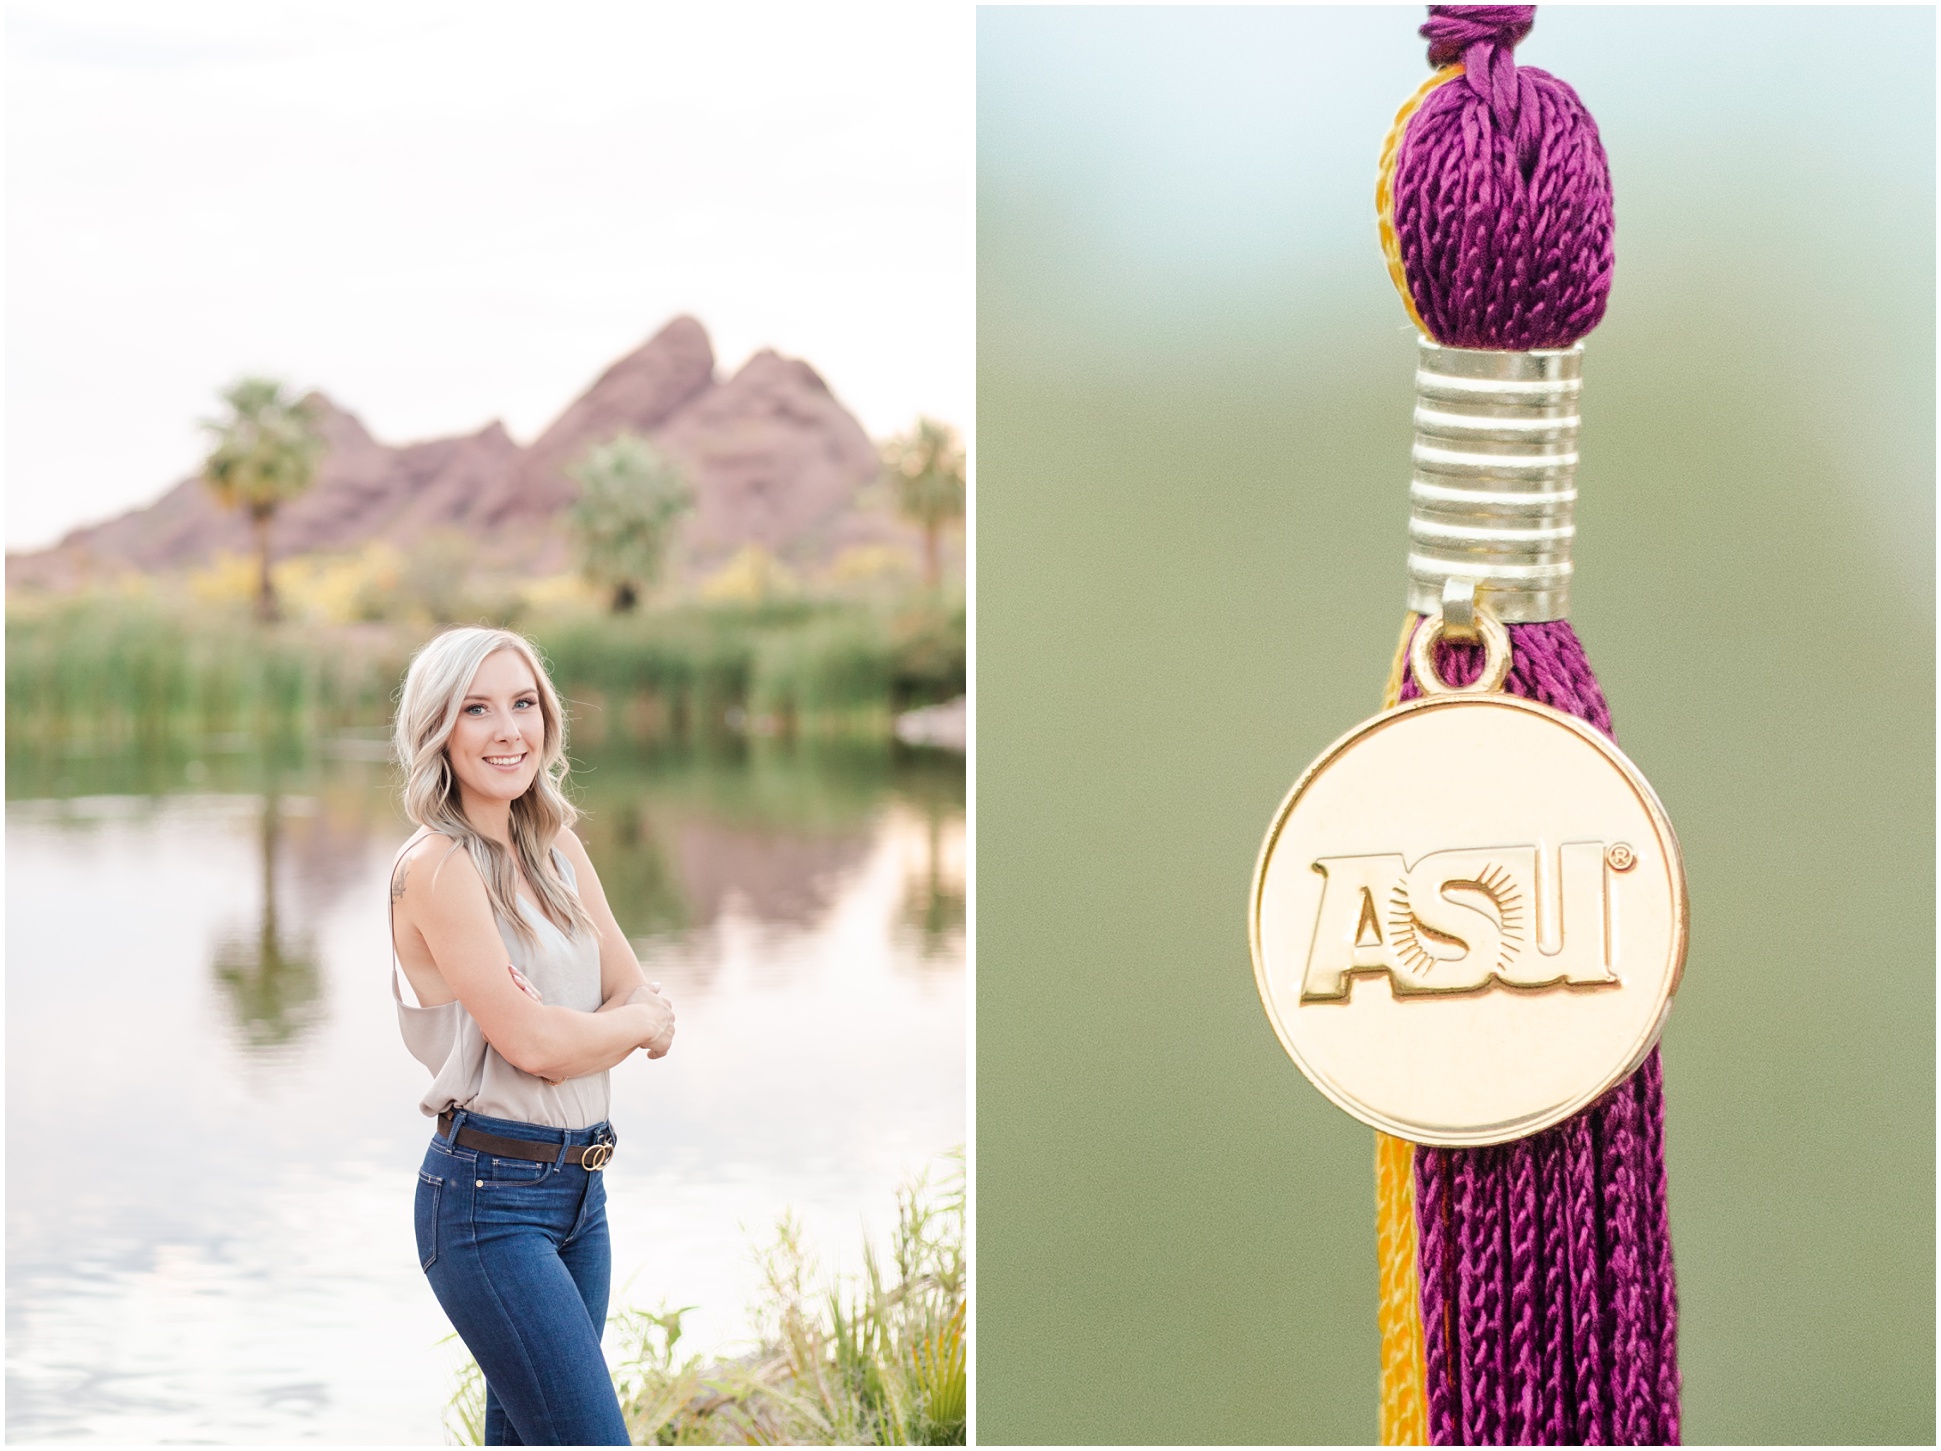 Left: Kaitlyn Schares standing with her arms crossed at Papago Park; Right: ASU tassle